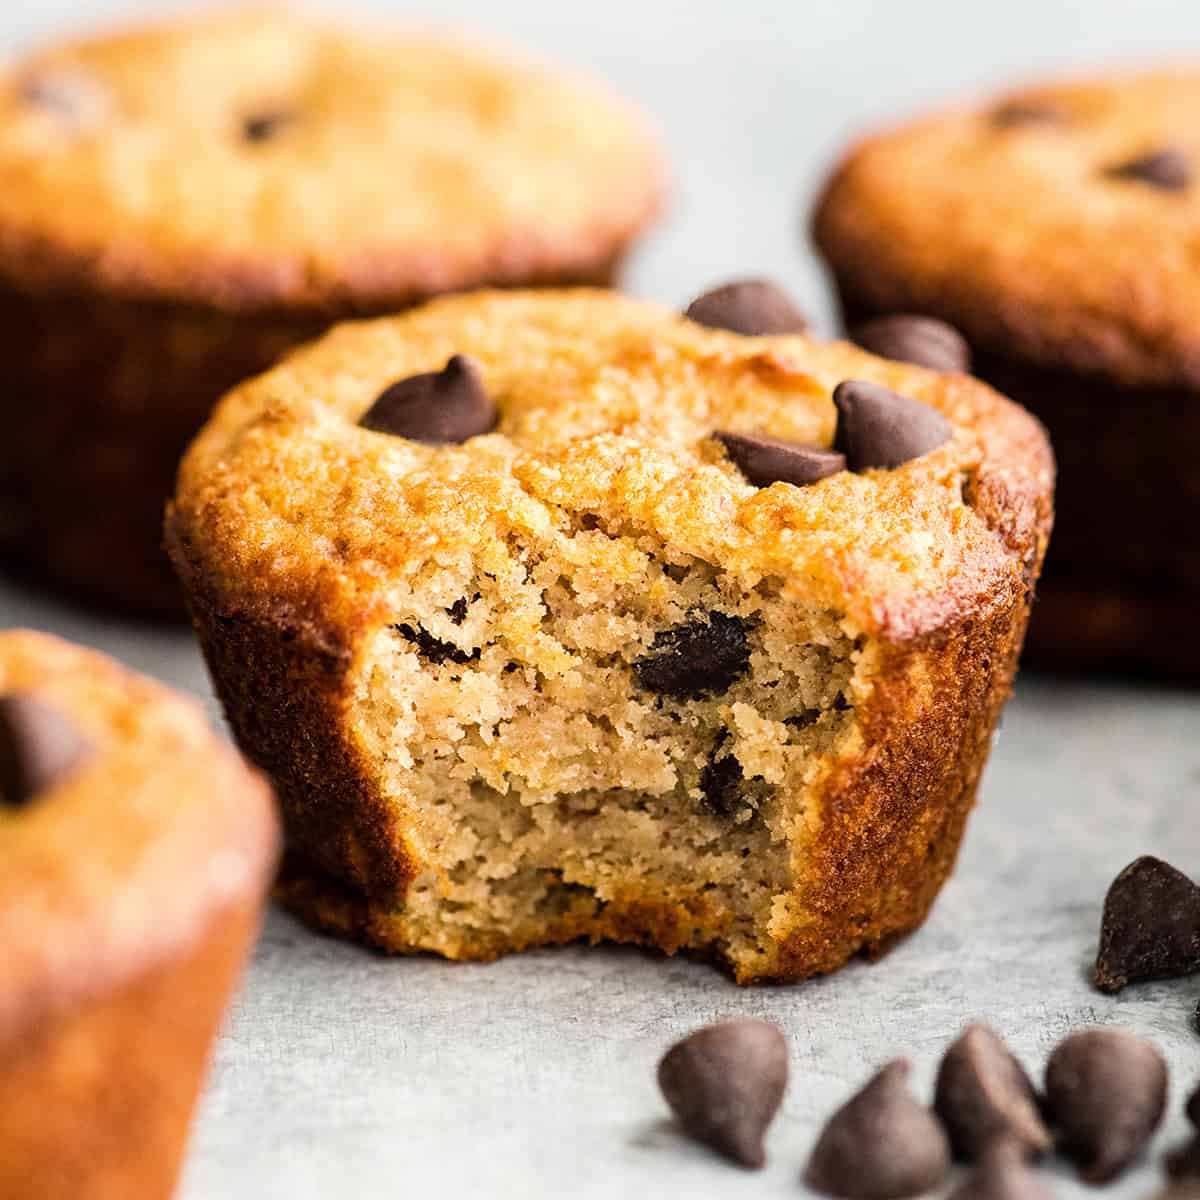 4 Gluten Free Chocolate Chip Muffins, one with a bite taken out of it